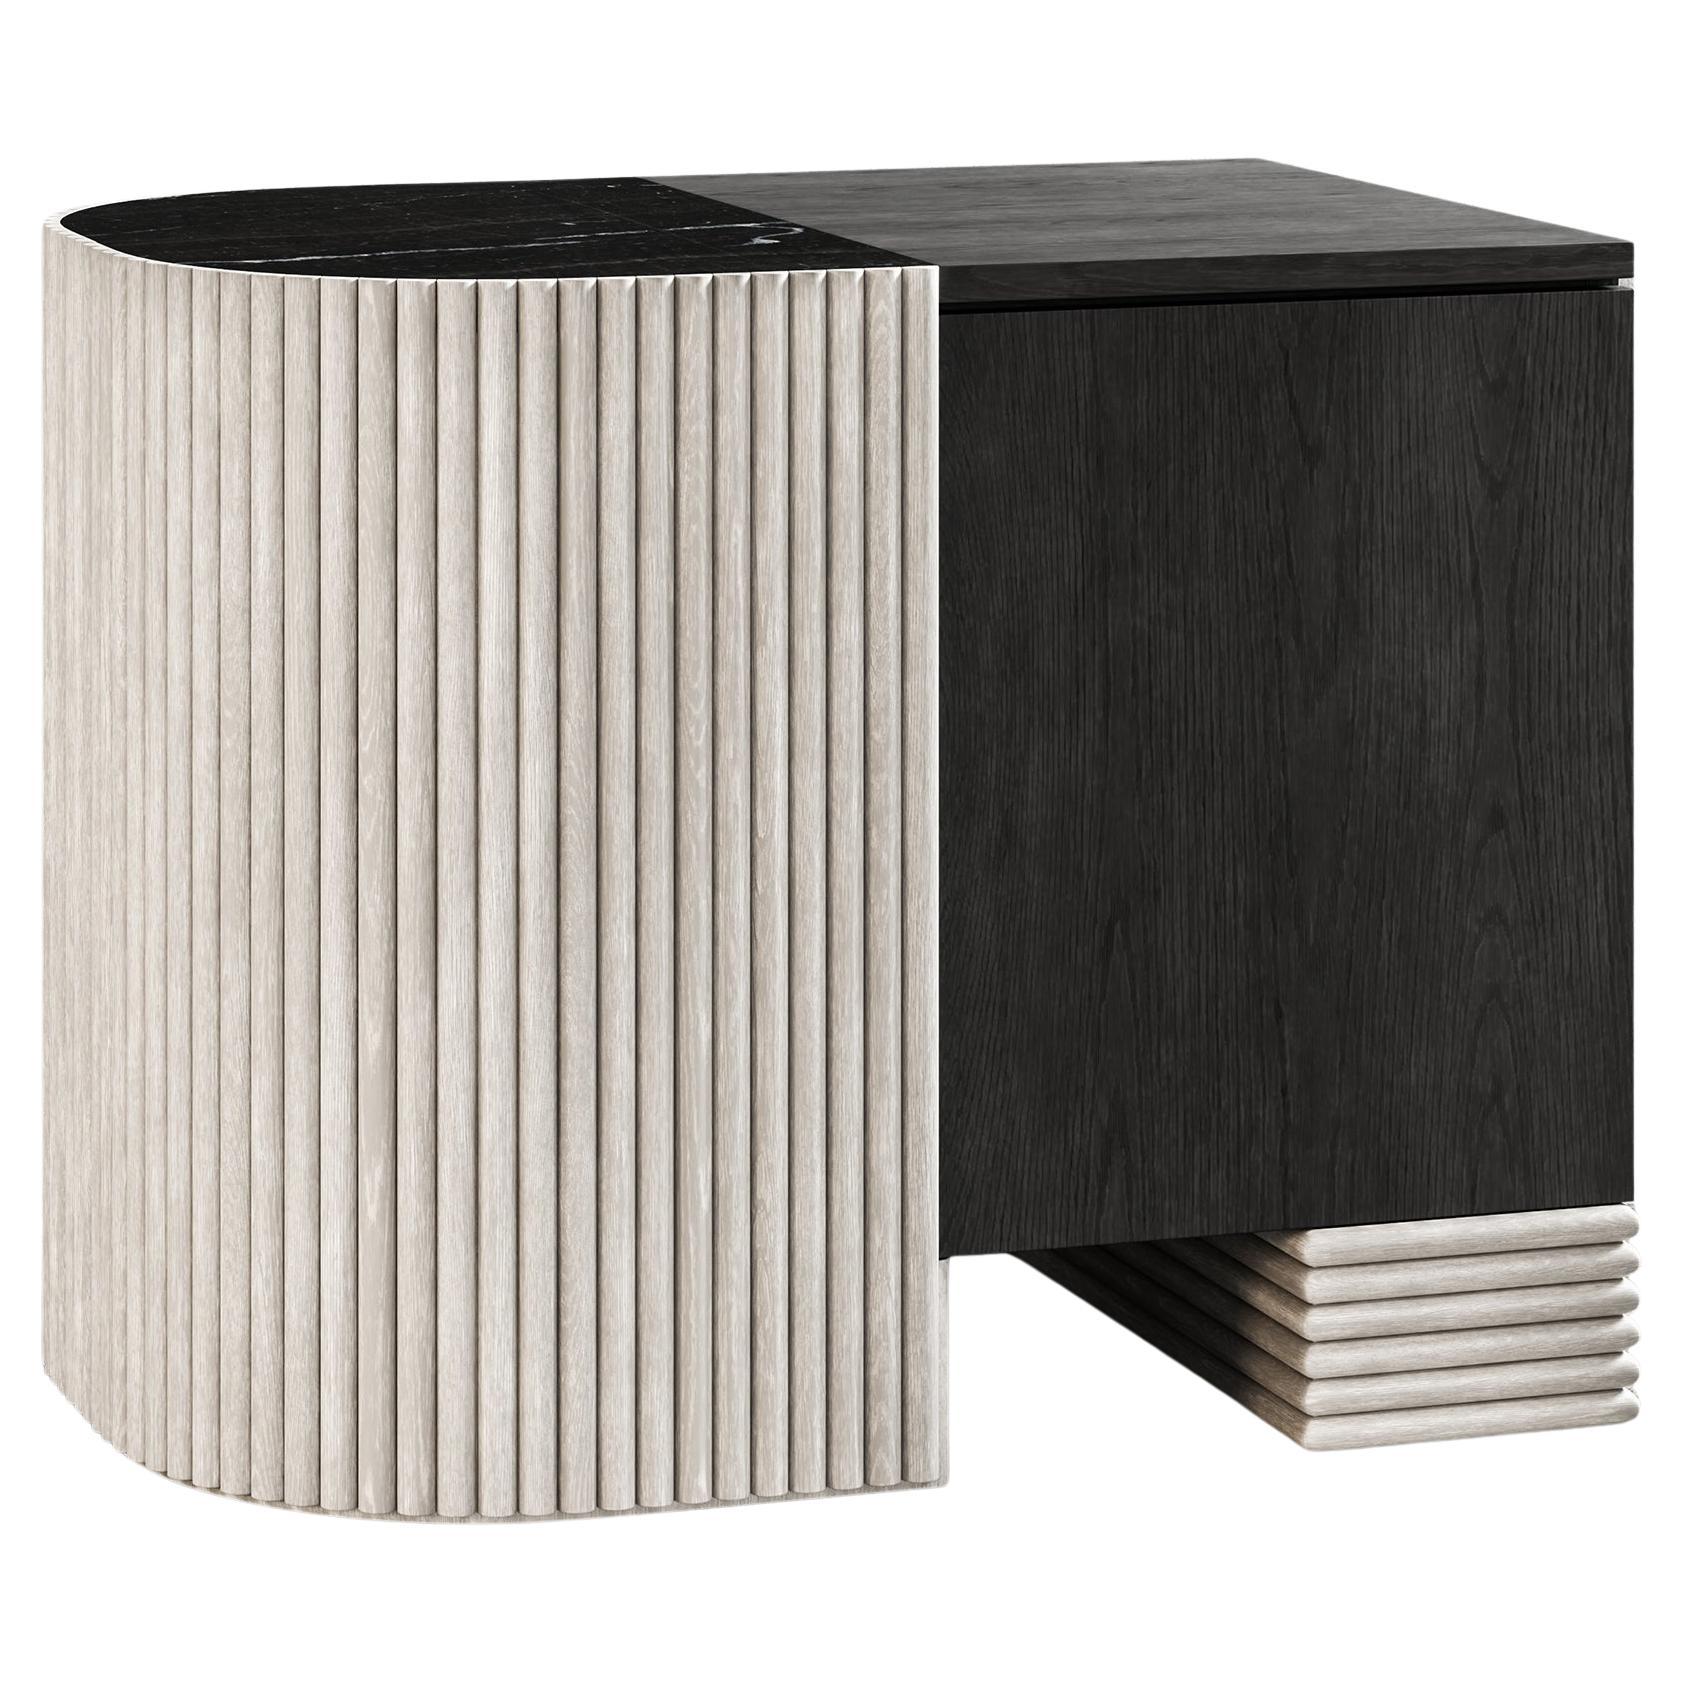 SWAY NIGHTSTAND - Modern Design with Sandy & Ebony Oak + Nero Marquina Marble For Sale